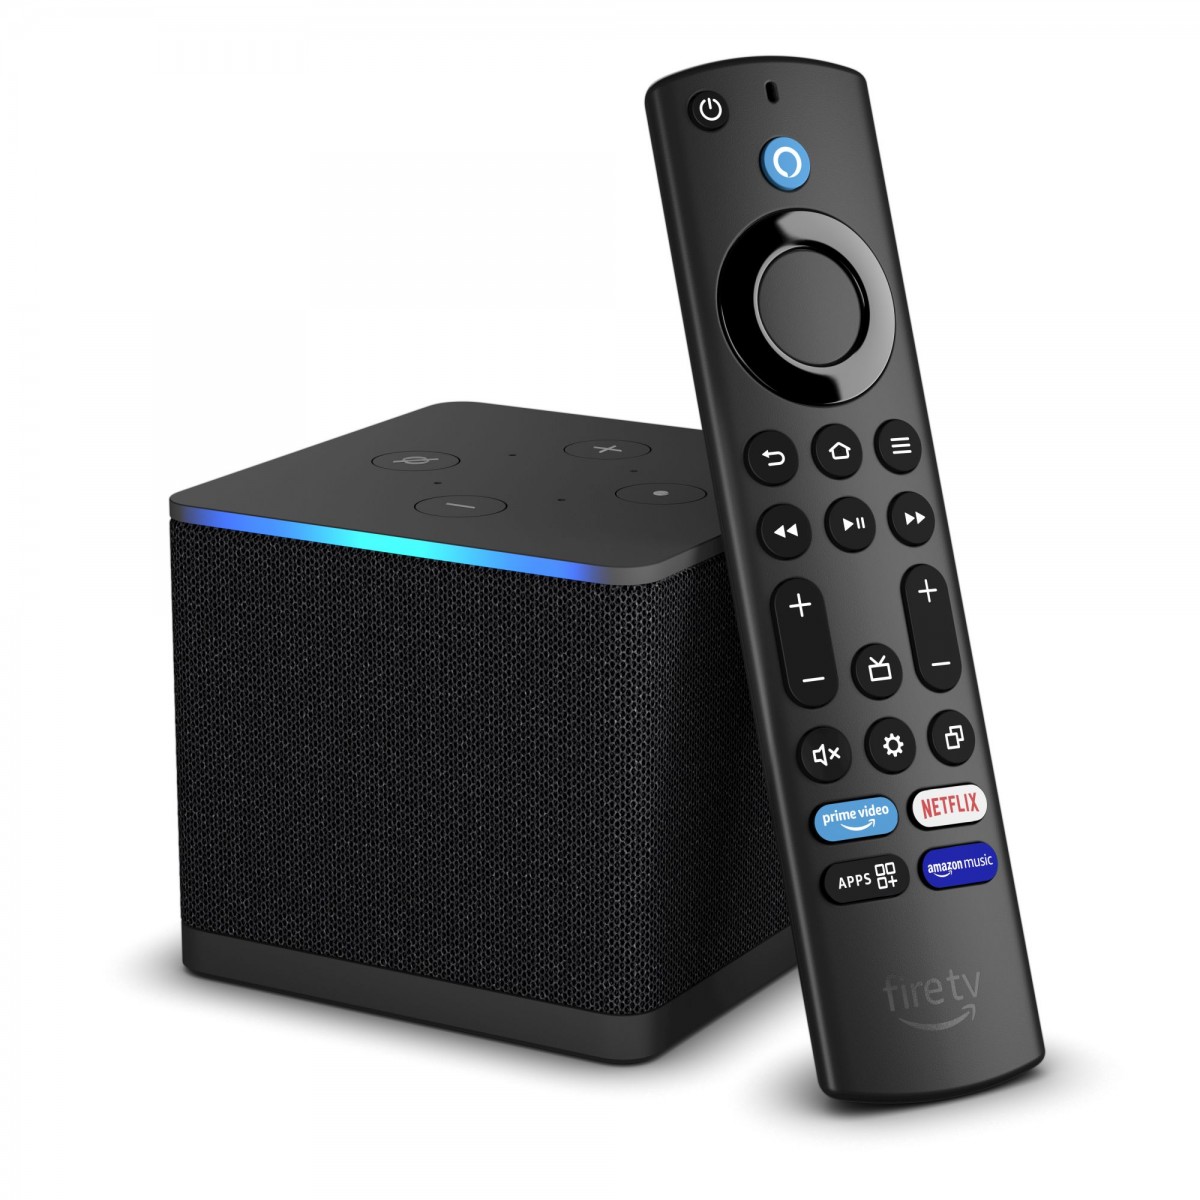 Amazon announces third generation Fire TV Cube and new Alexa Voice Remote Pro